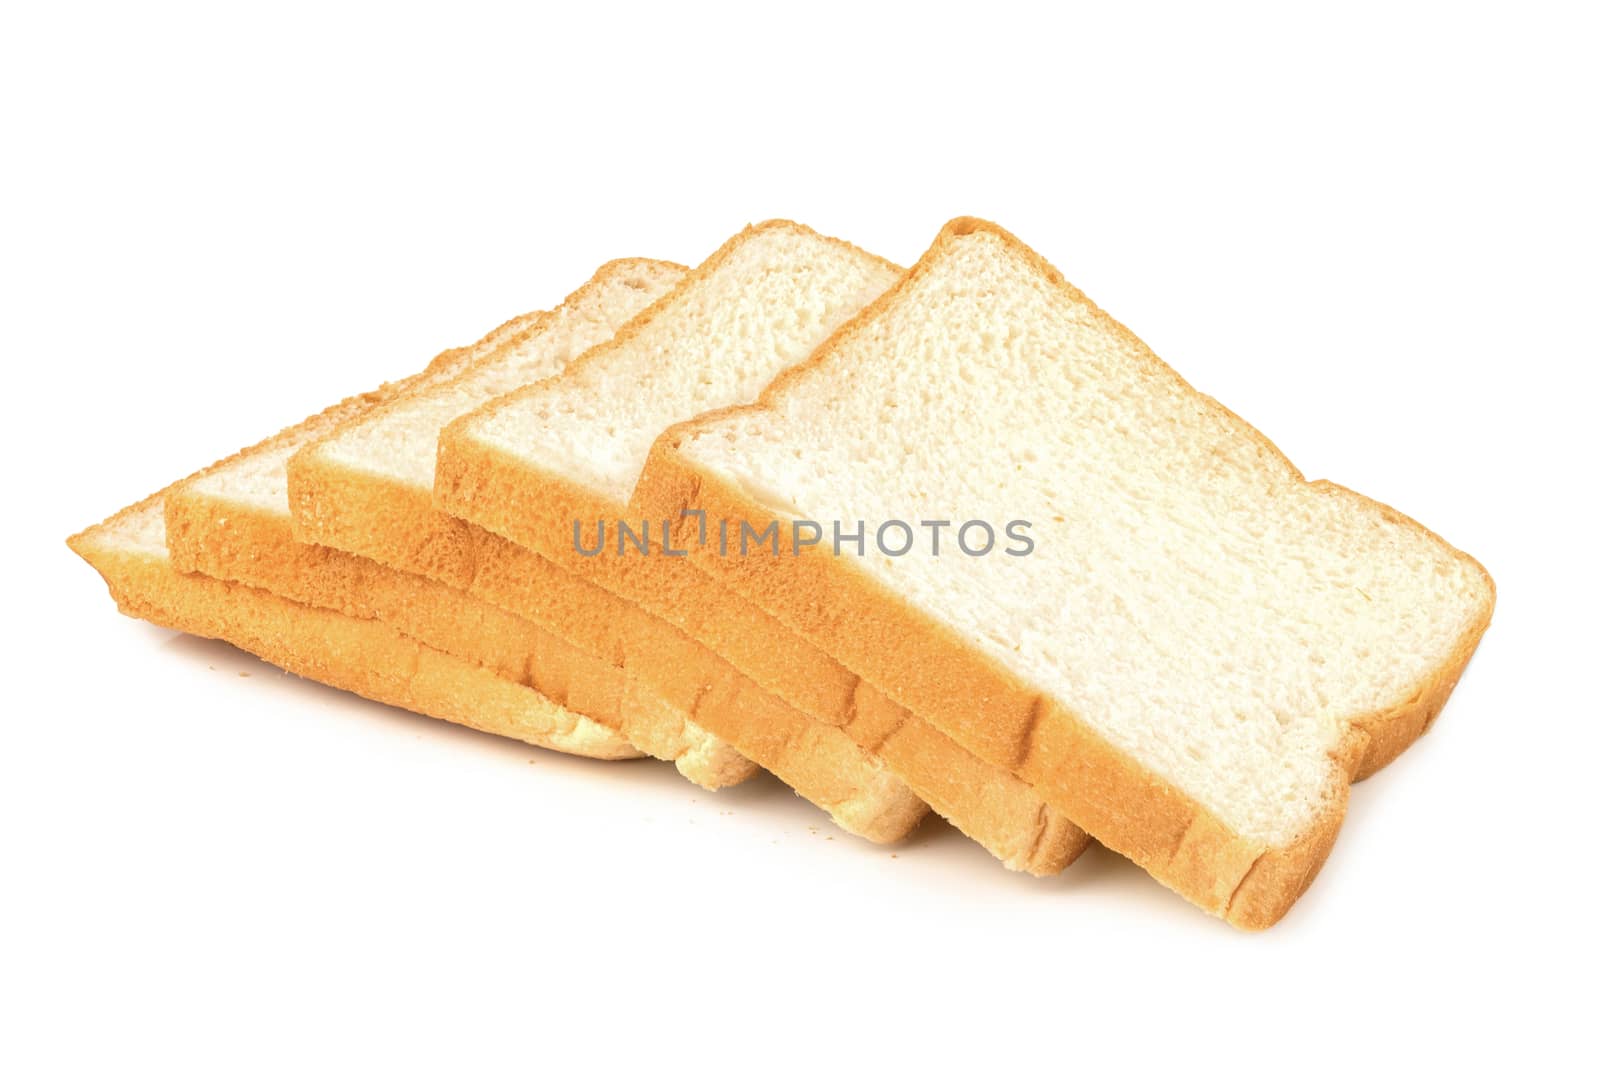 Slice of bread isolated on white background by sompongtom